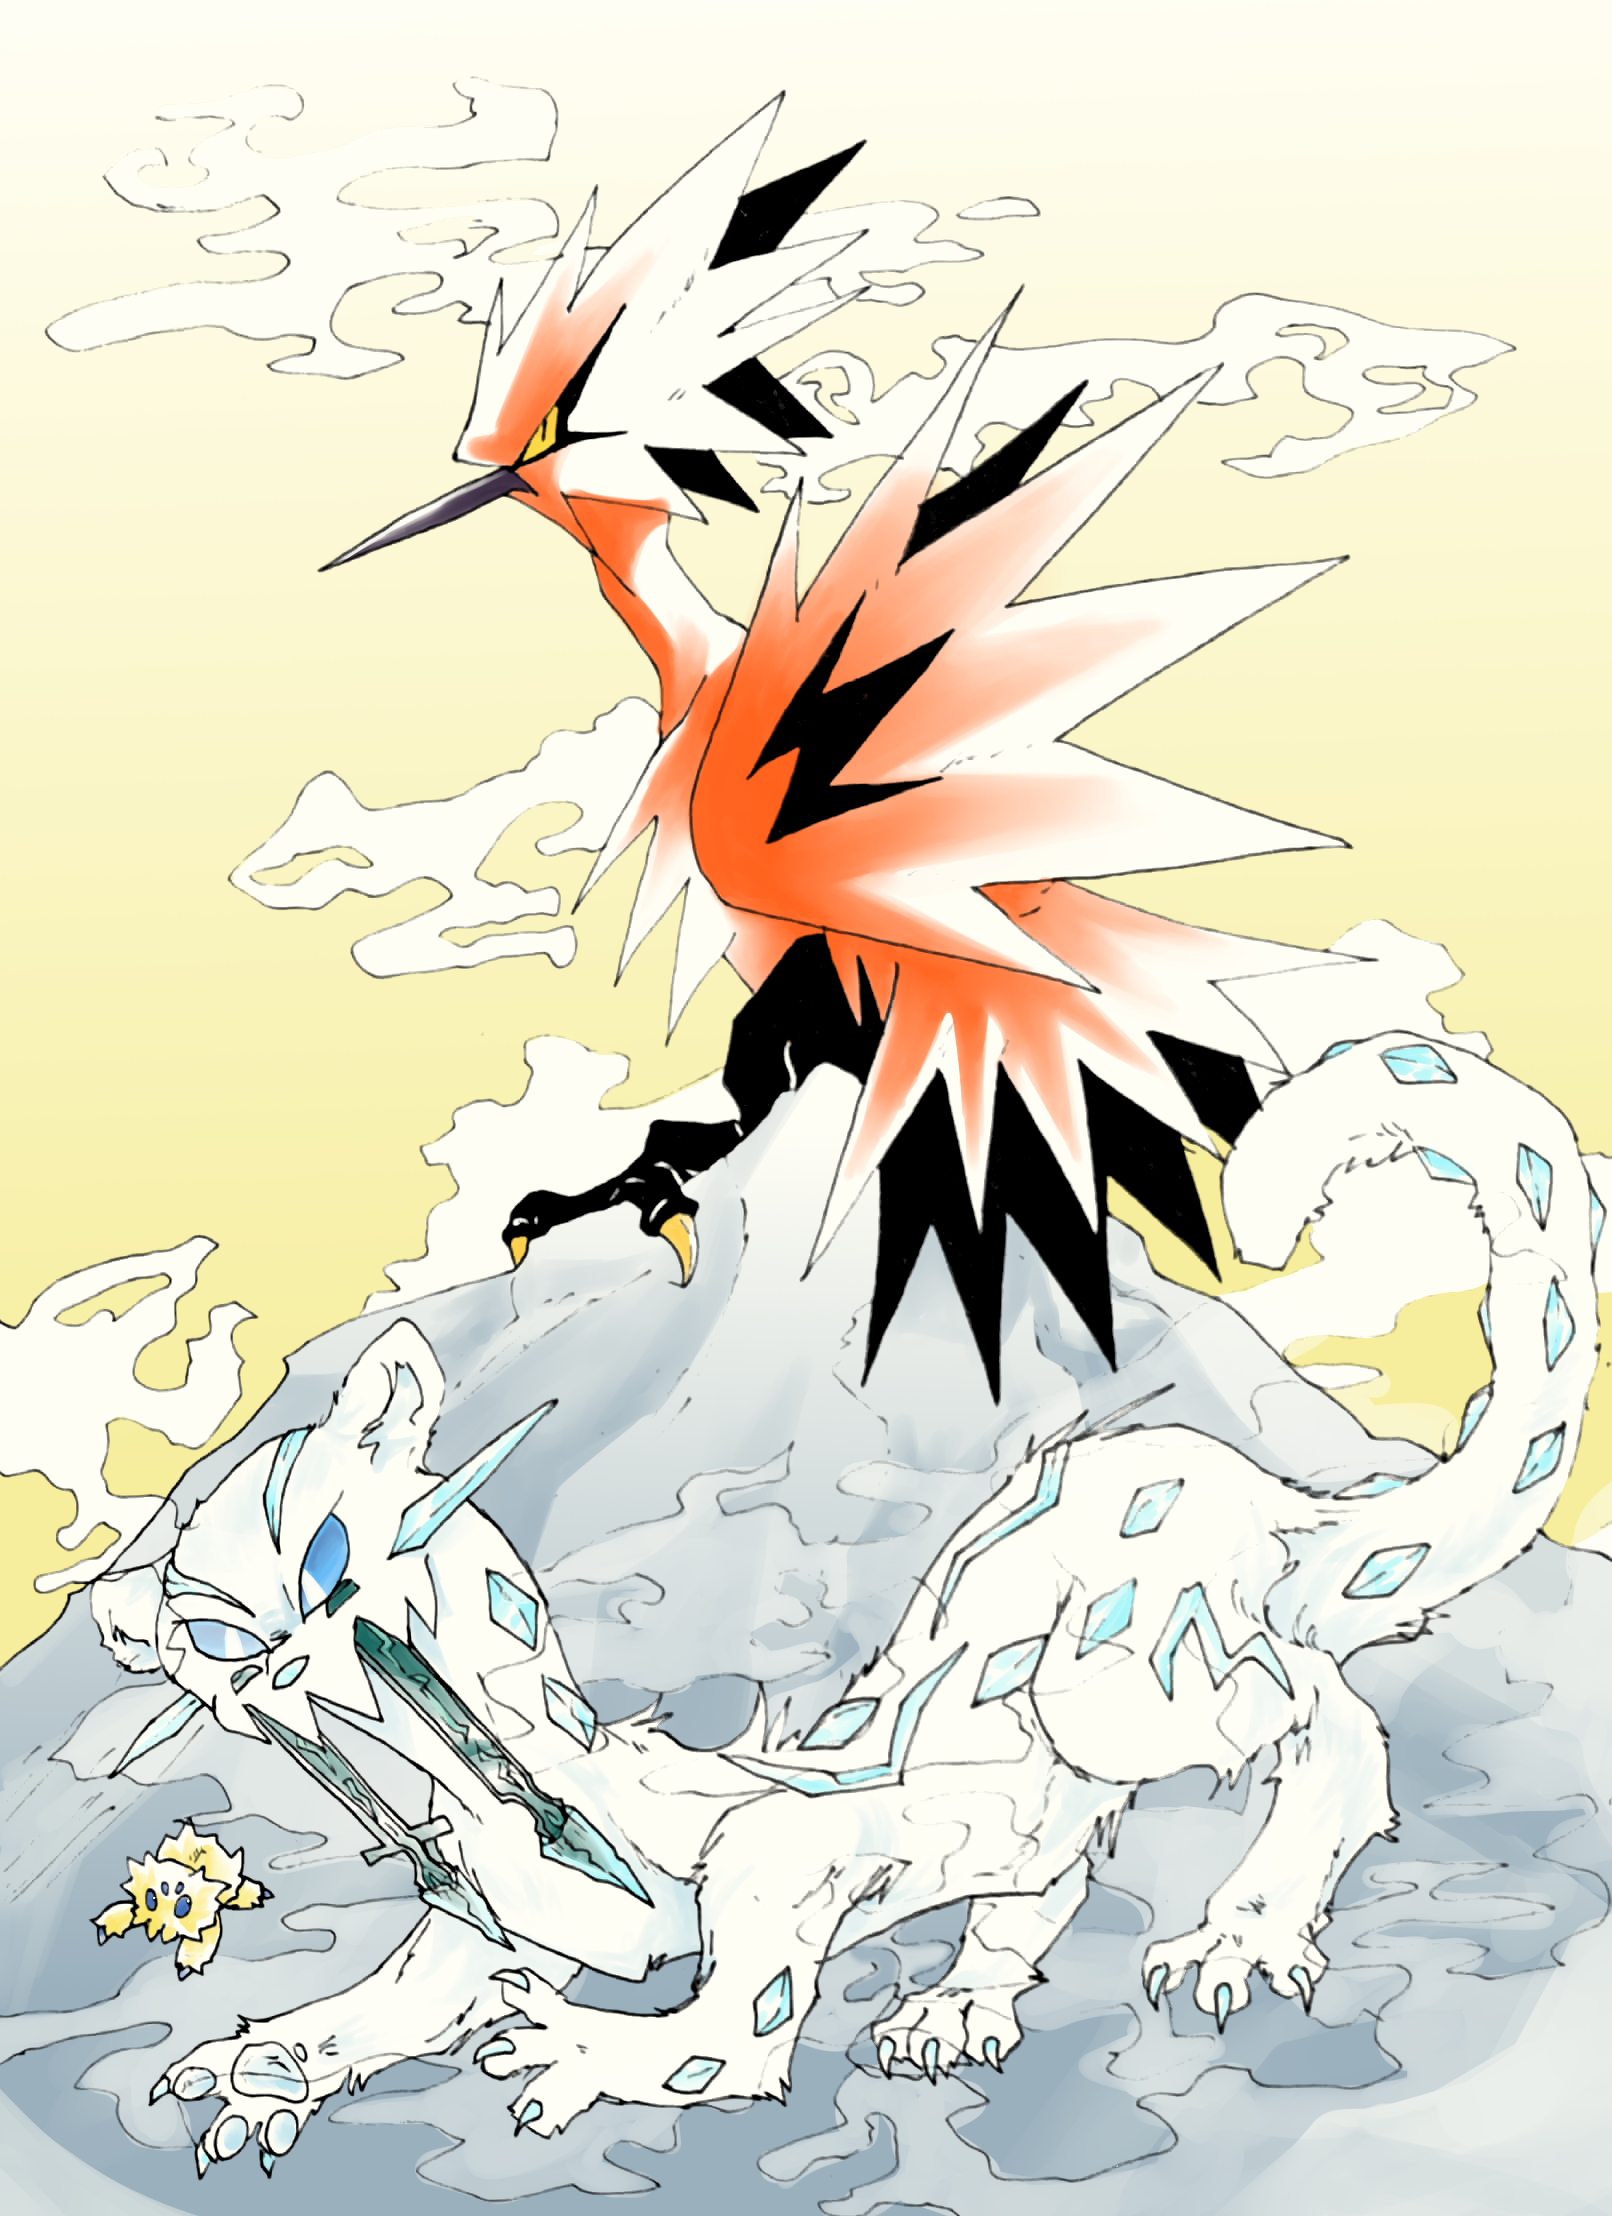 G. Zapdos and Chien-Pao